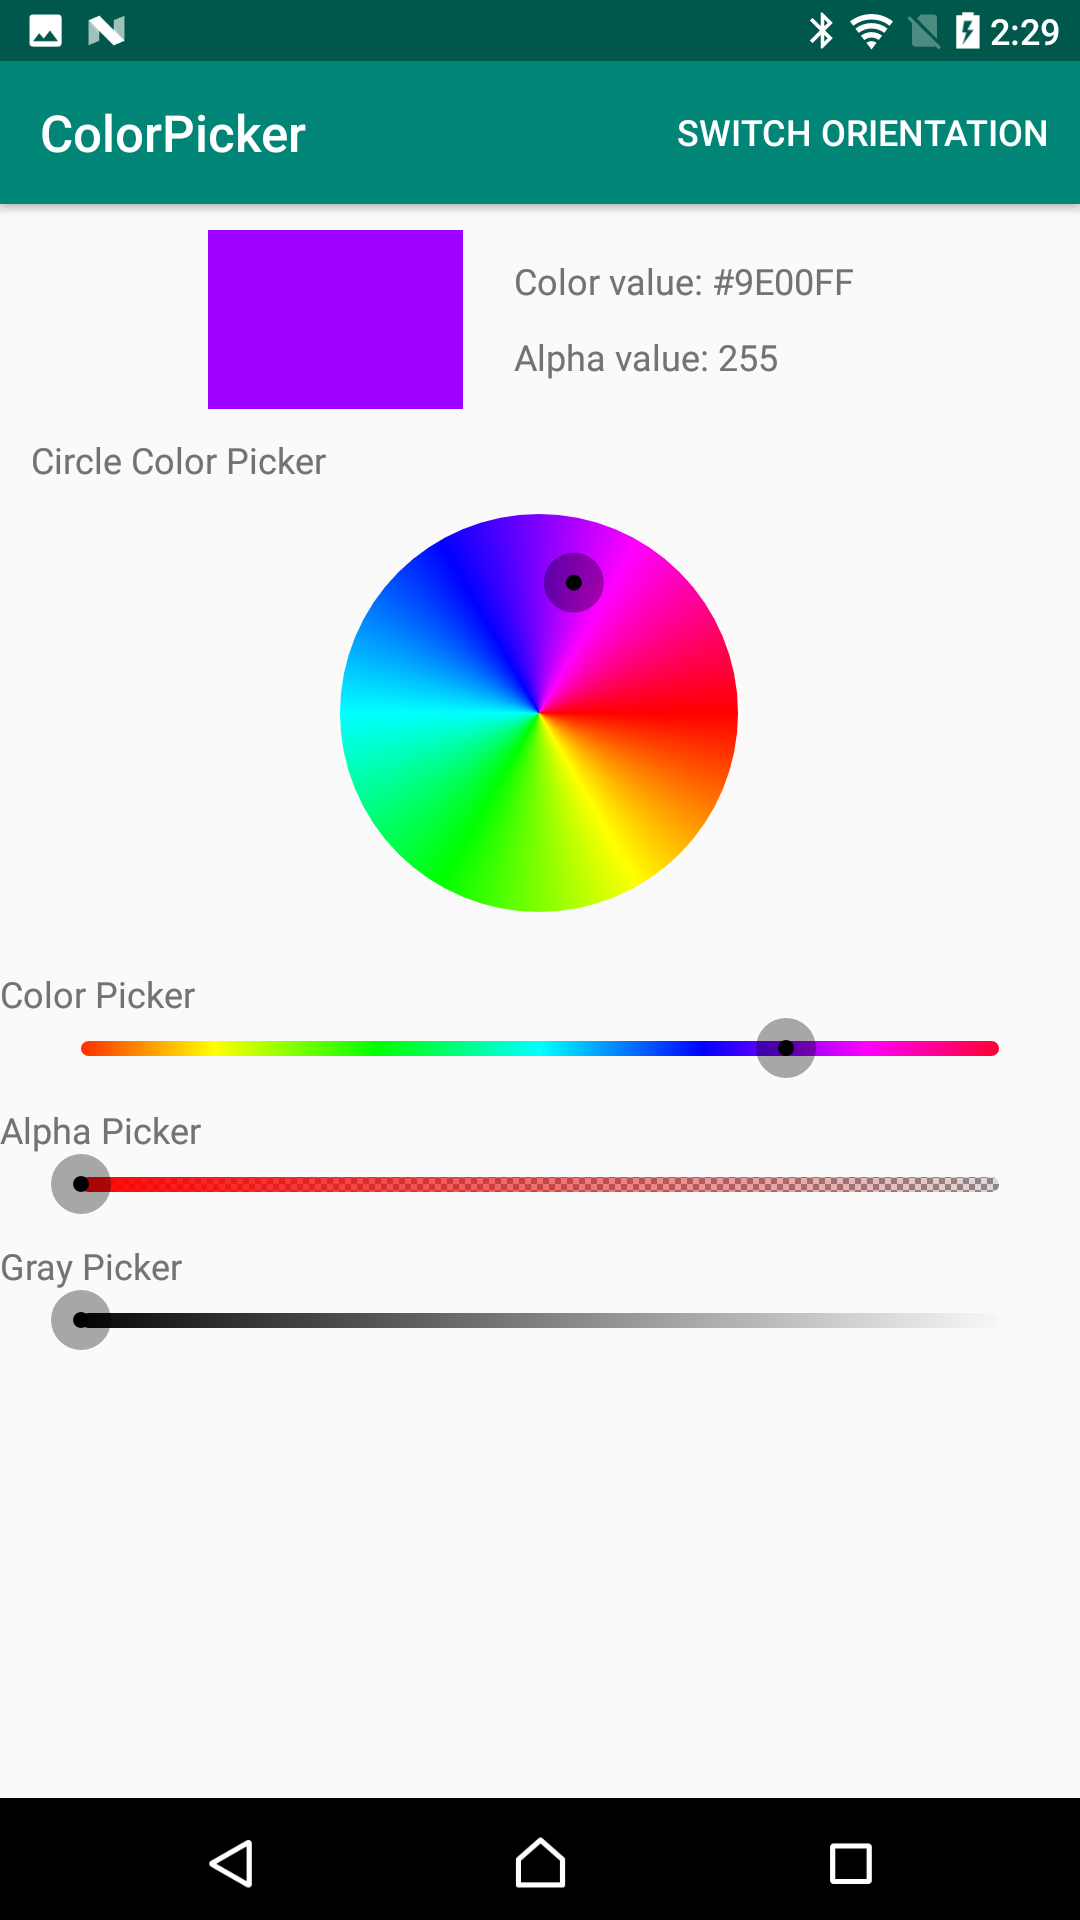 GitHub - Cricin/ColorPicker: A Color Picker Library For Android